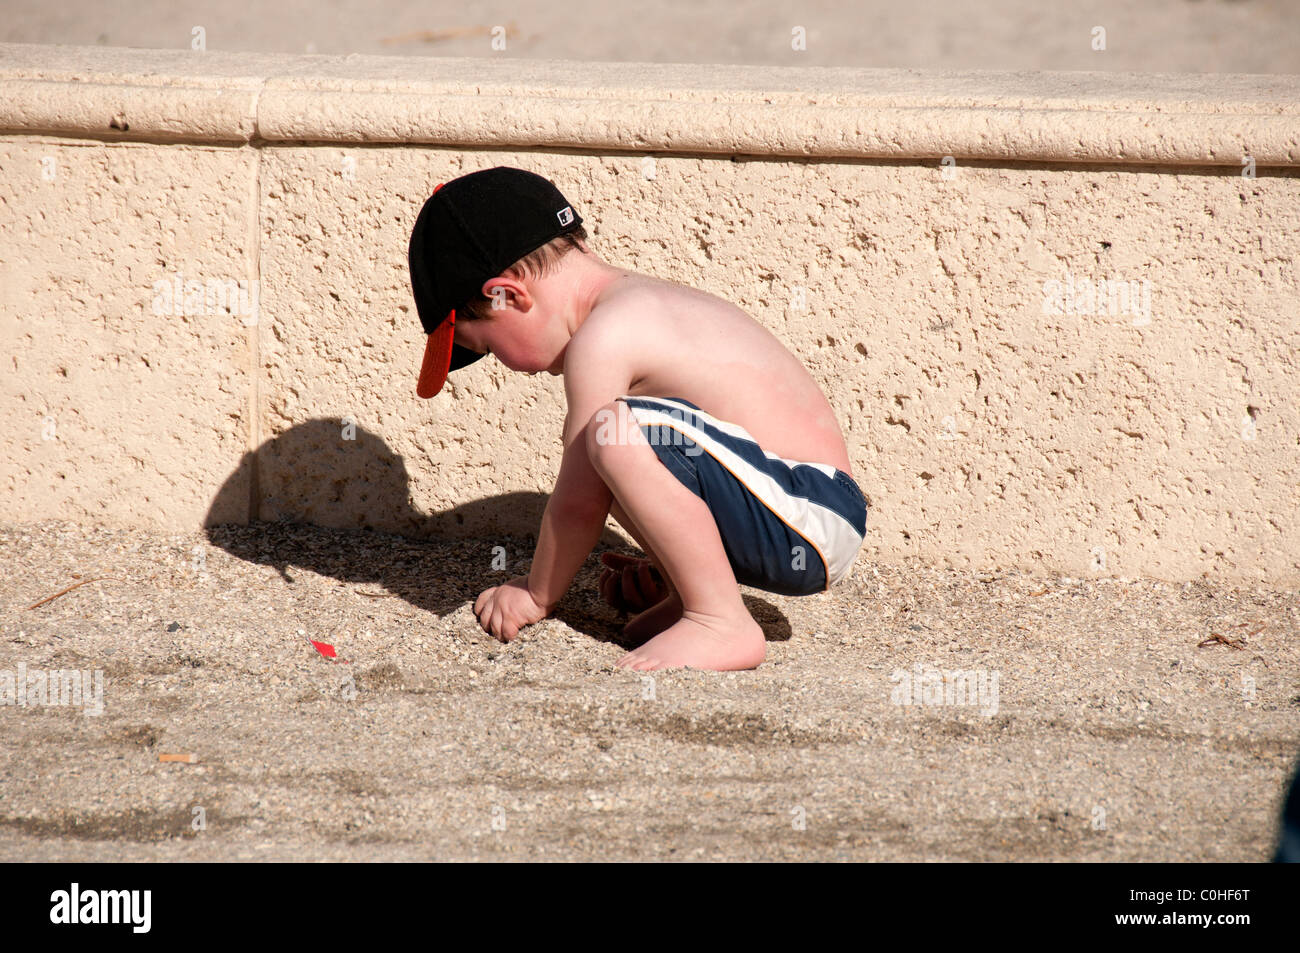 Little boy playing in sand. Stock Photo